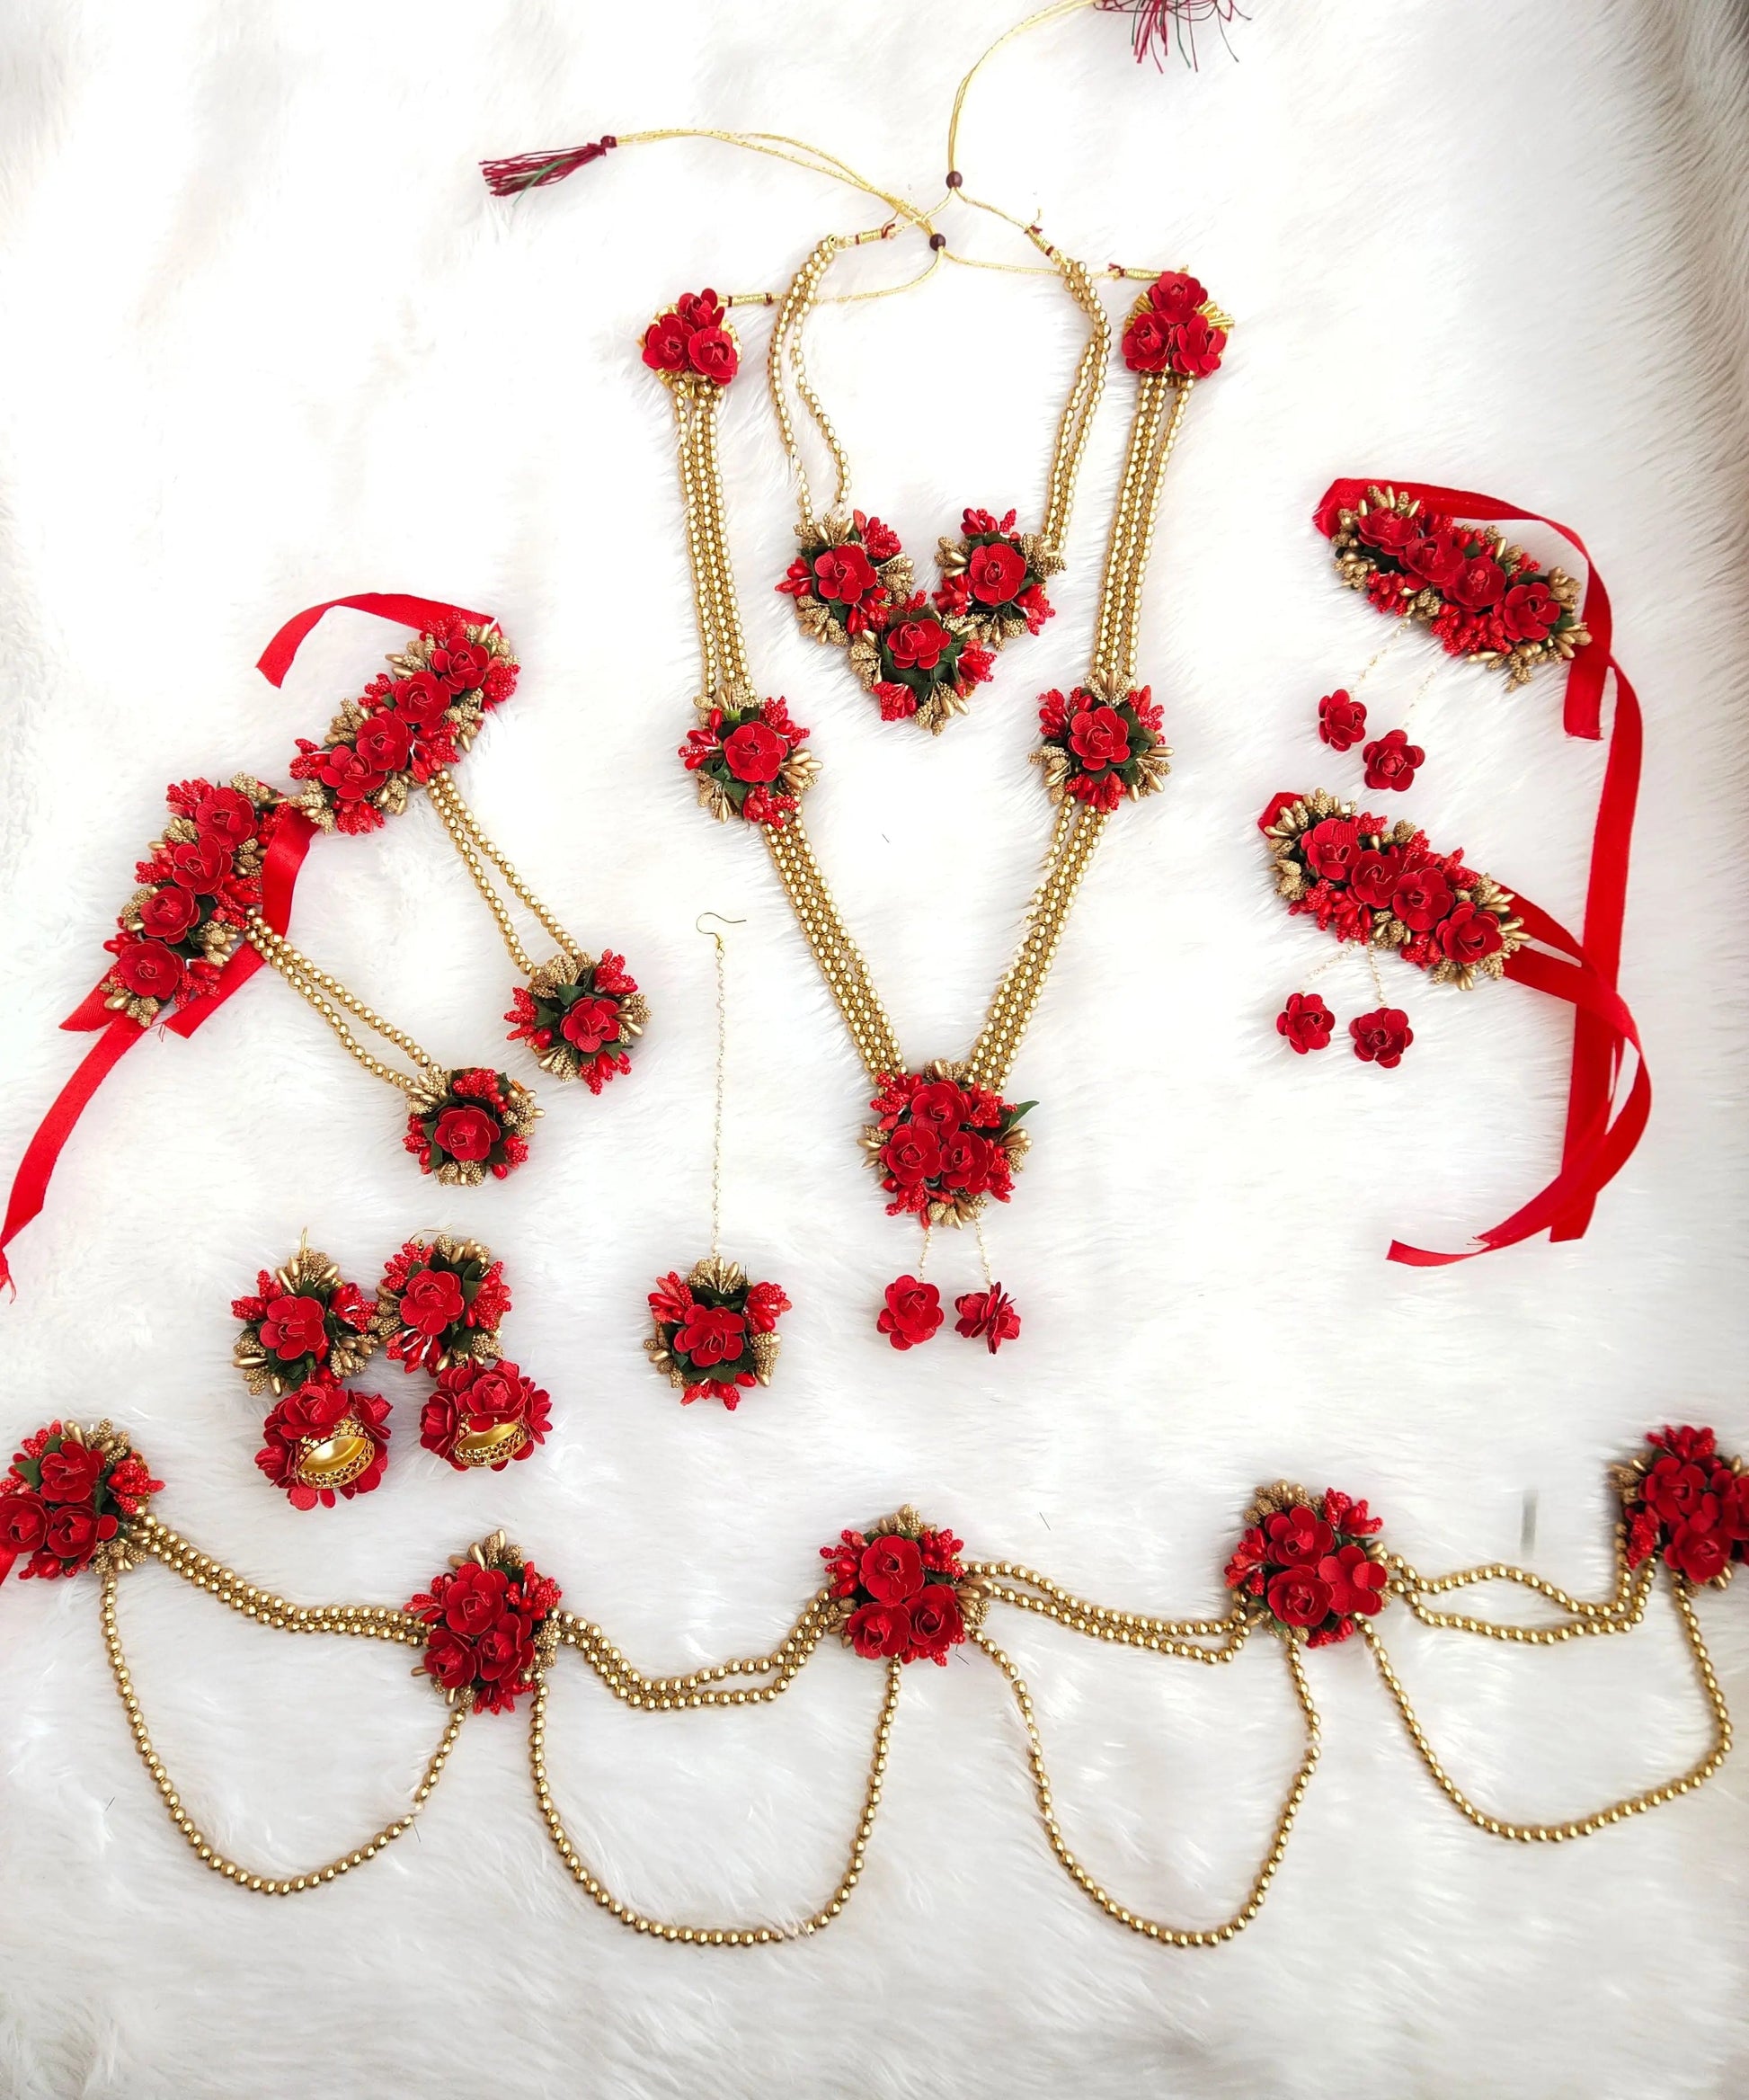 Red Blossom Baby Shower Jewelry Set: Elegant and Adorable Flower Accessories for Your Little One's Special Day!"